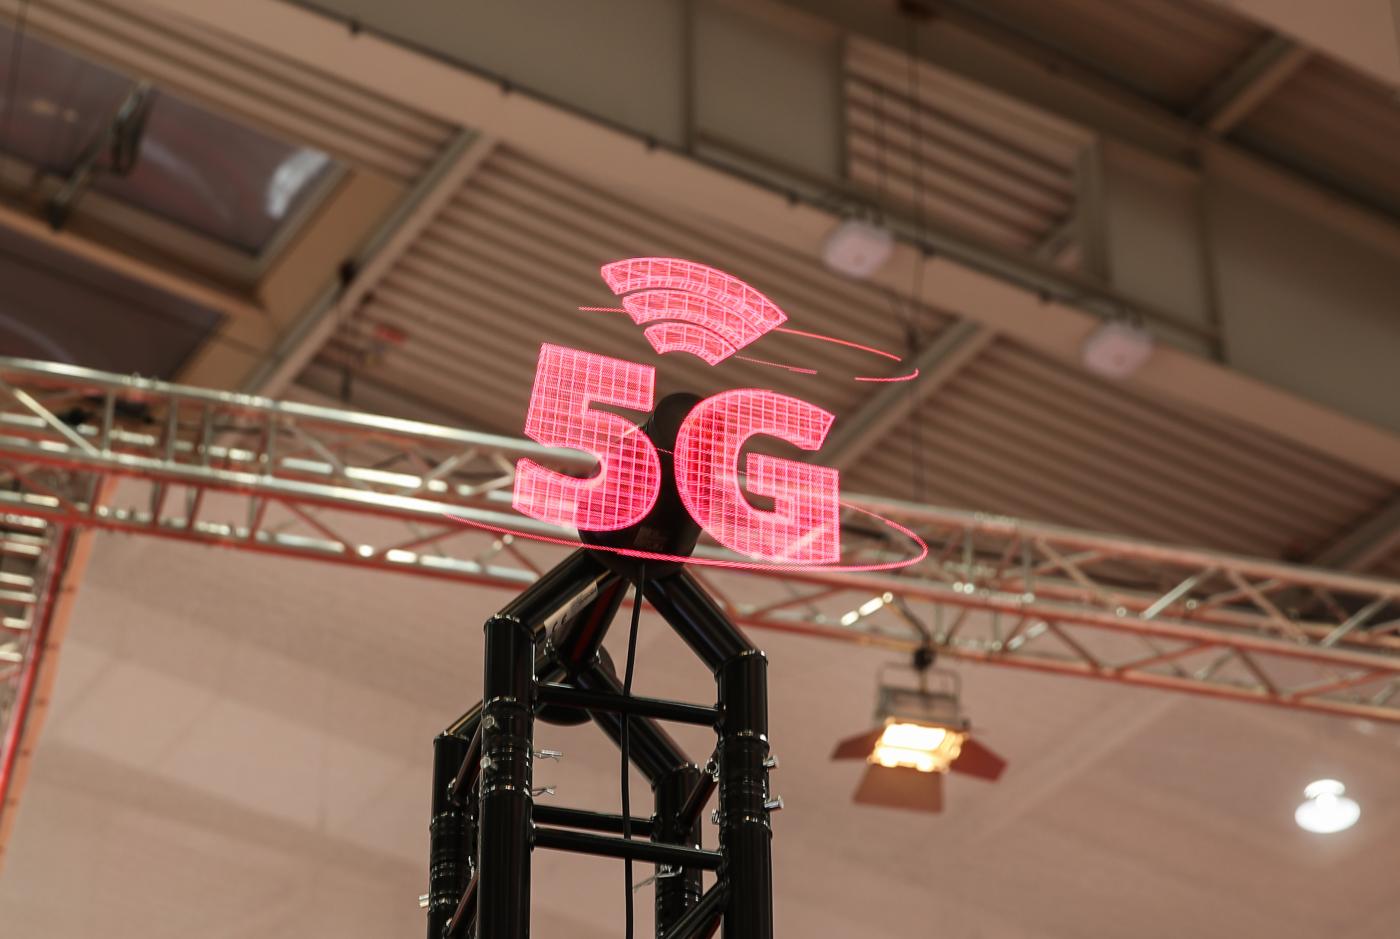 GERMANY-HANOVER FAIR-5G NETWORK by .